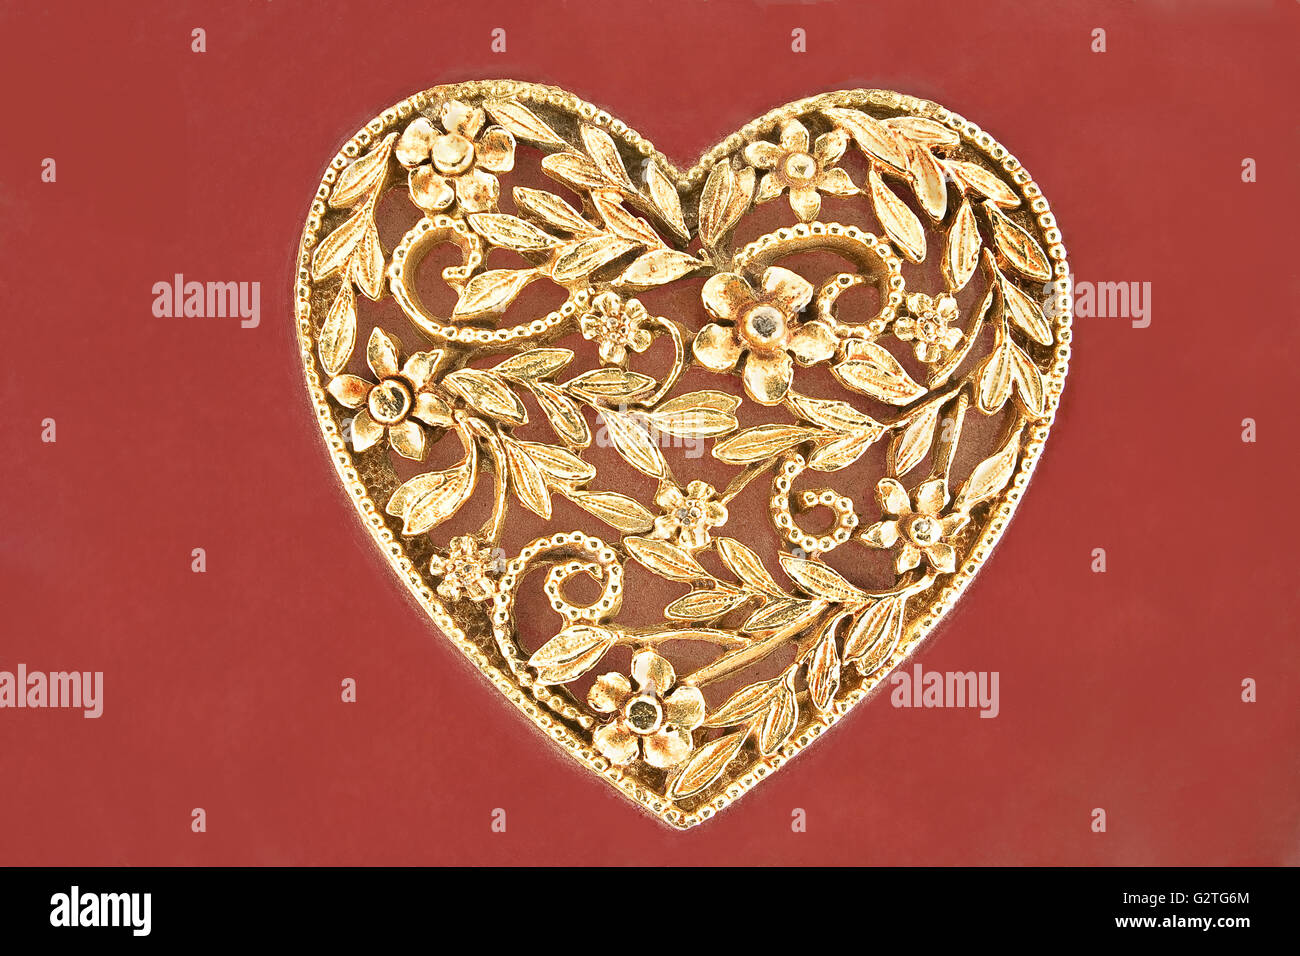 Golden heart jewelry  on red background Stock Photo